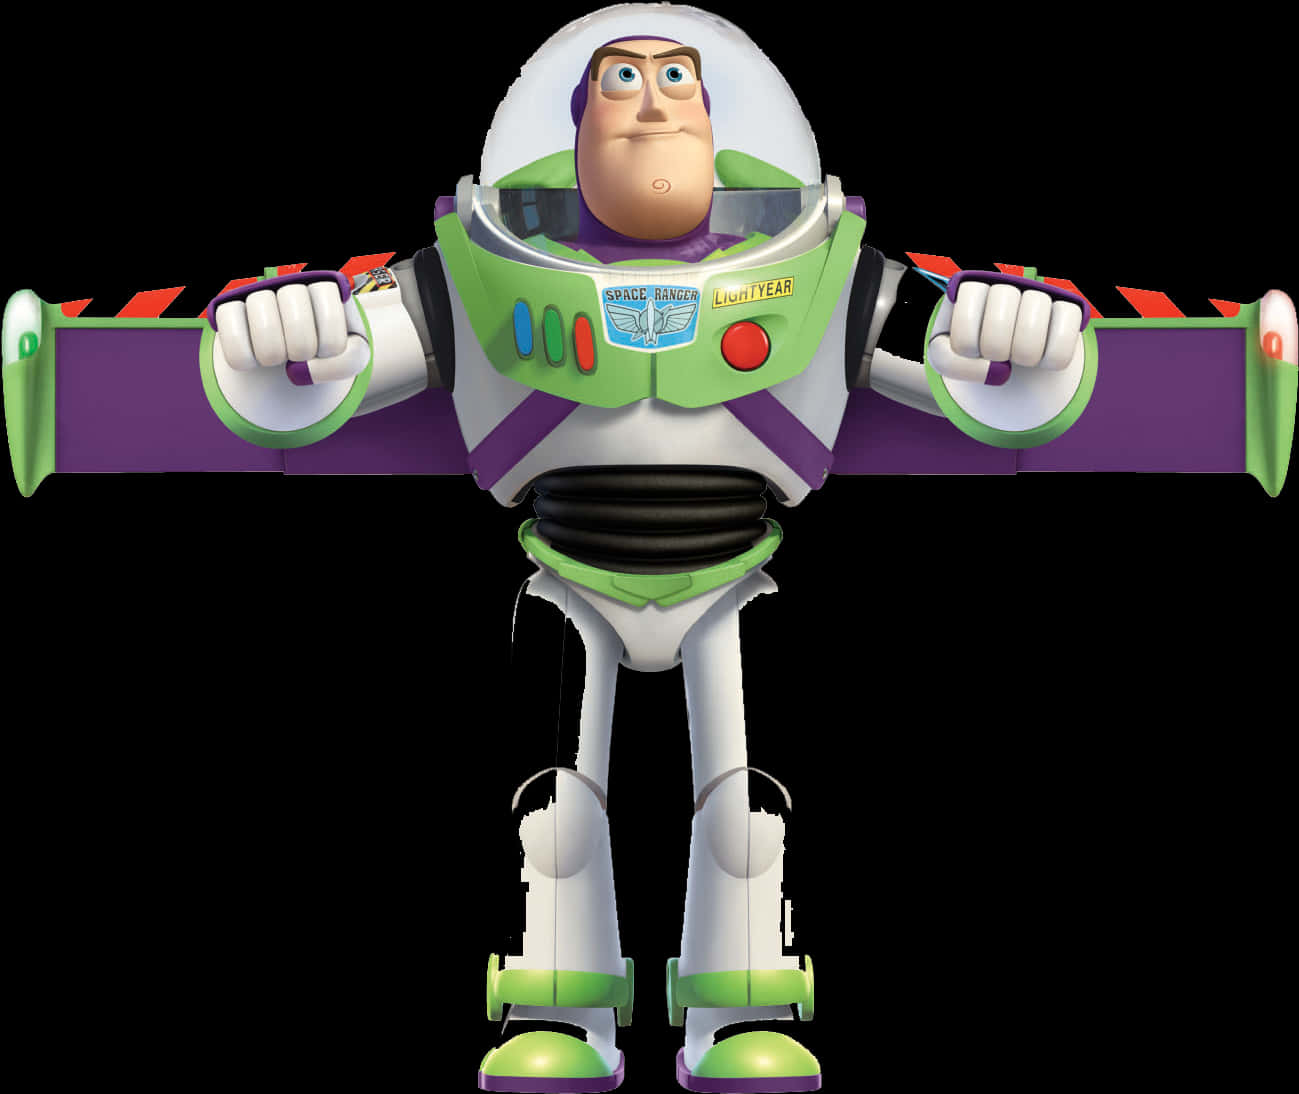 A Toy Character In A Space Suit